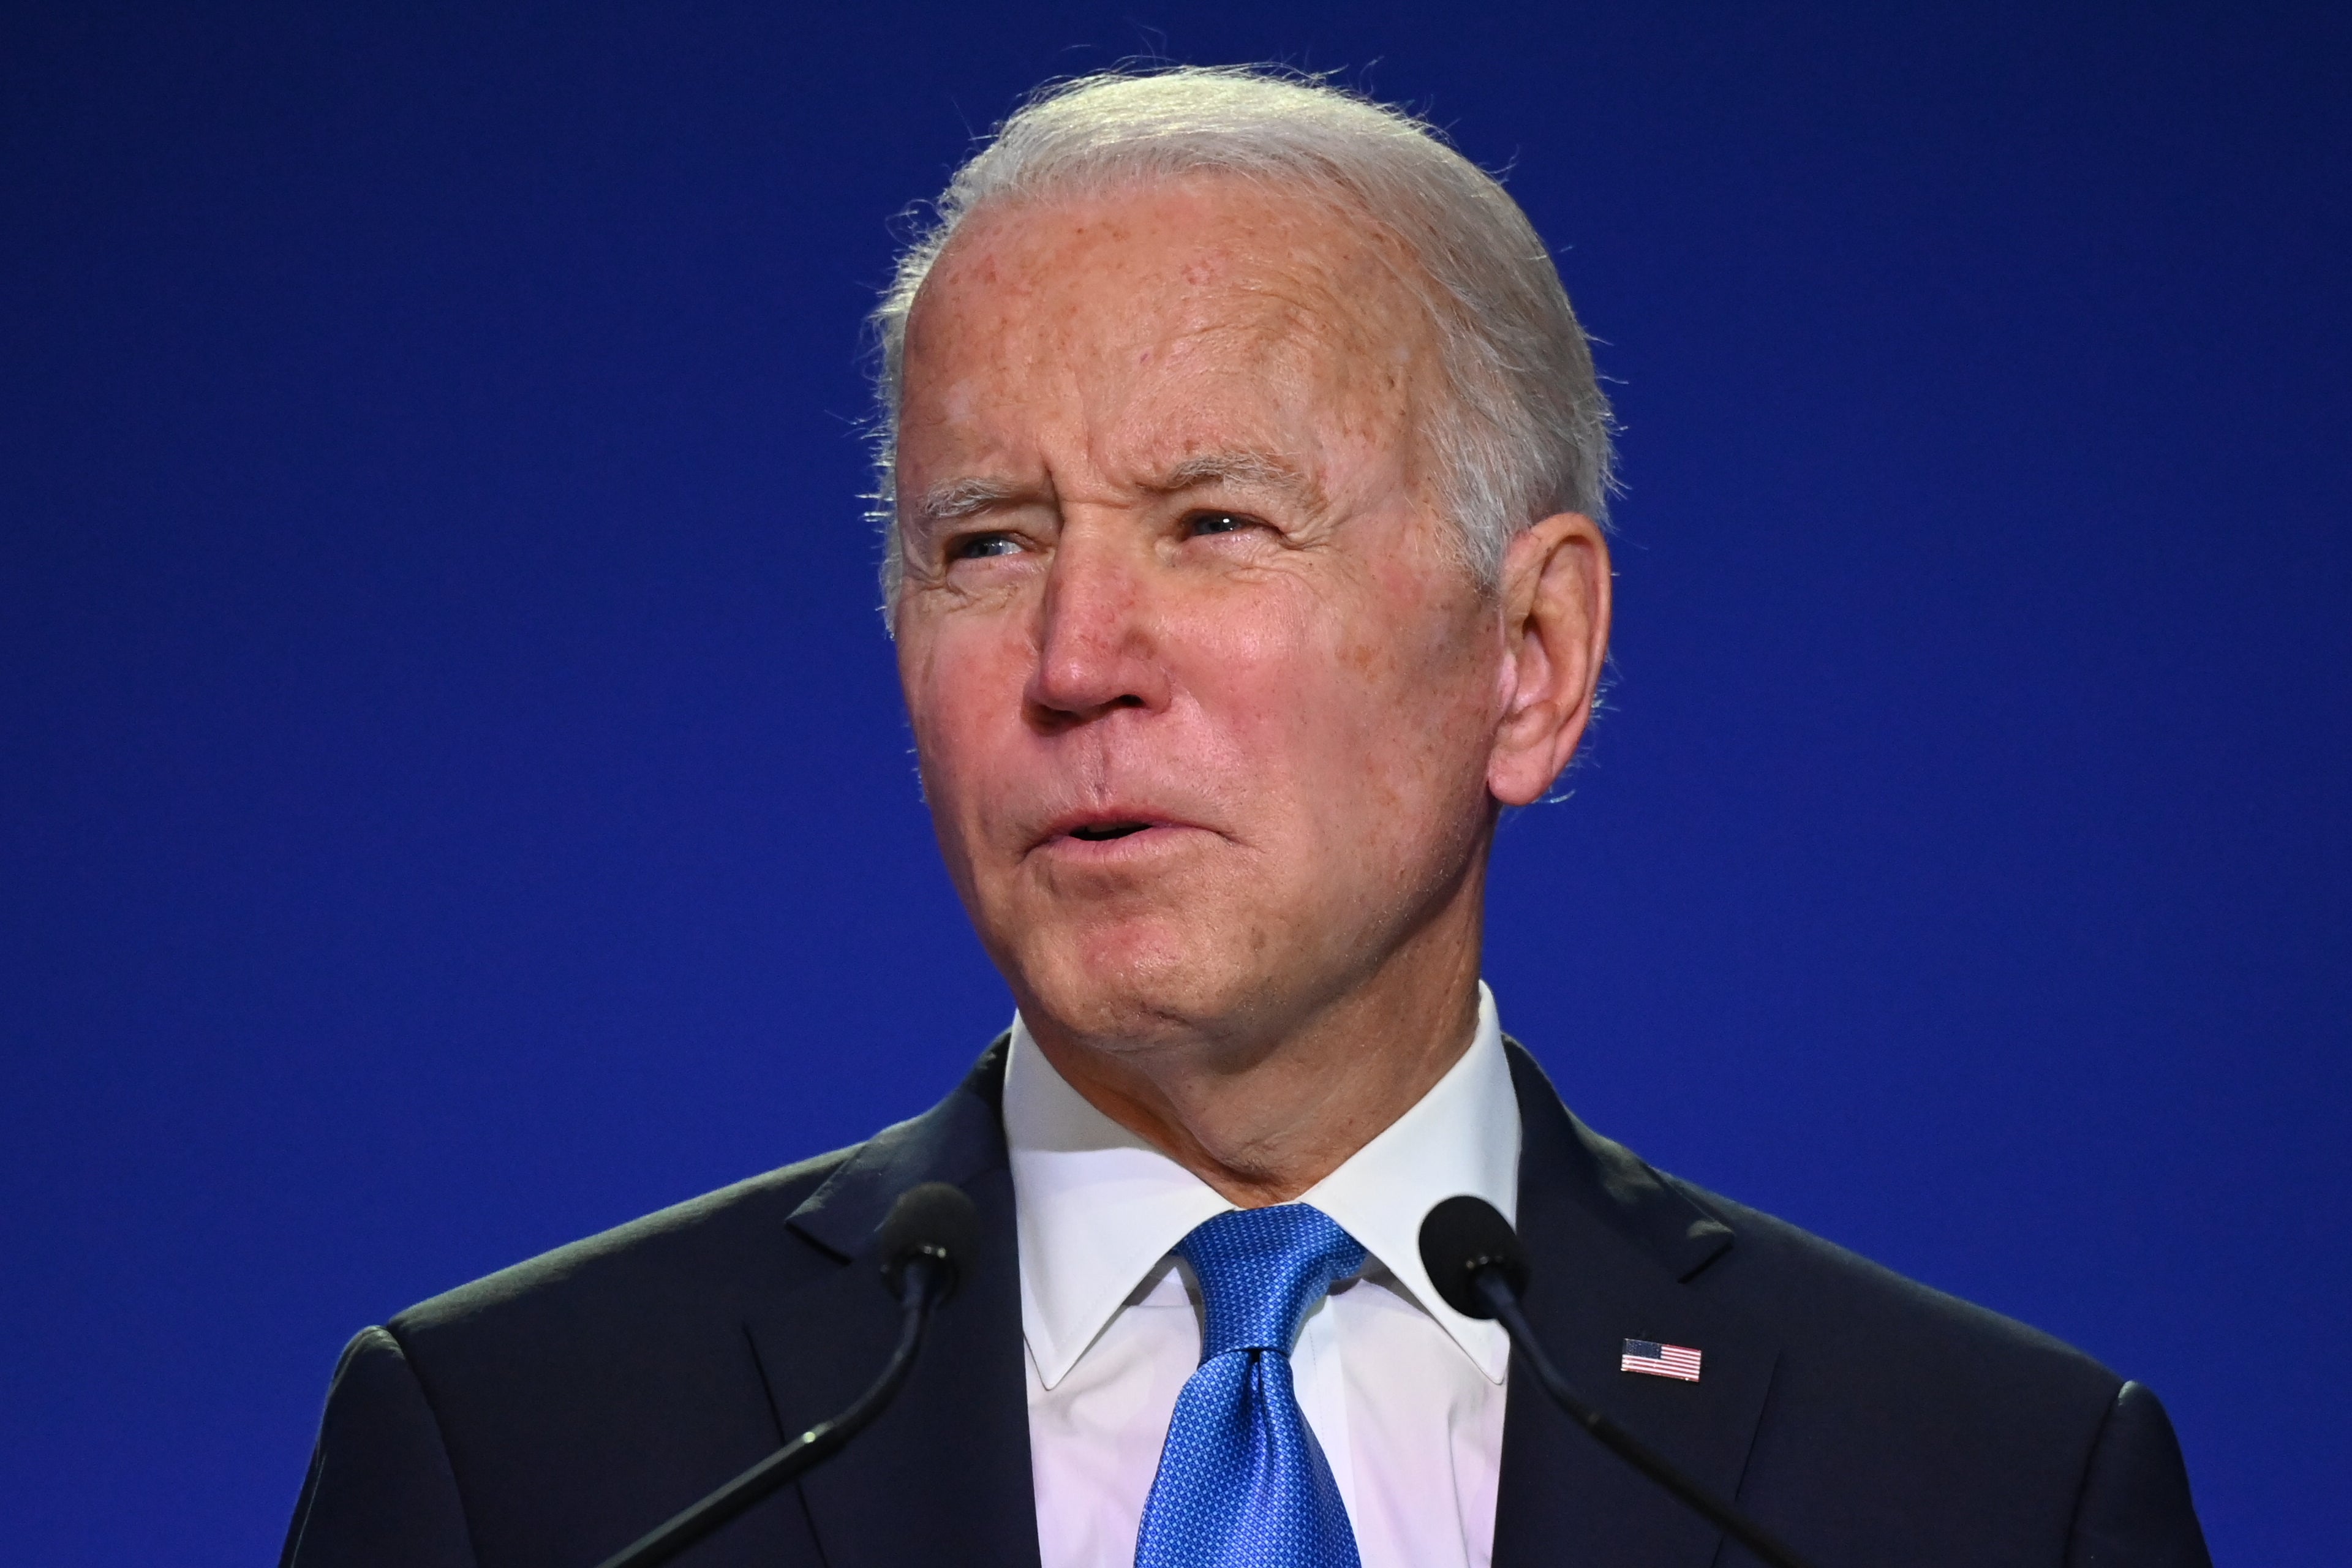 Joe Biden addressed the Russian people and called for regime change